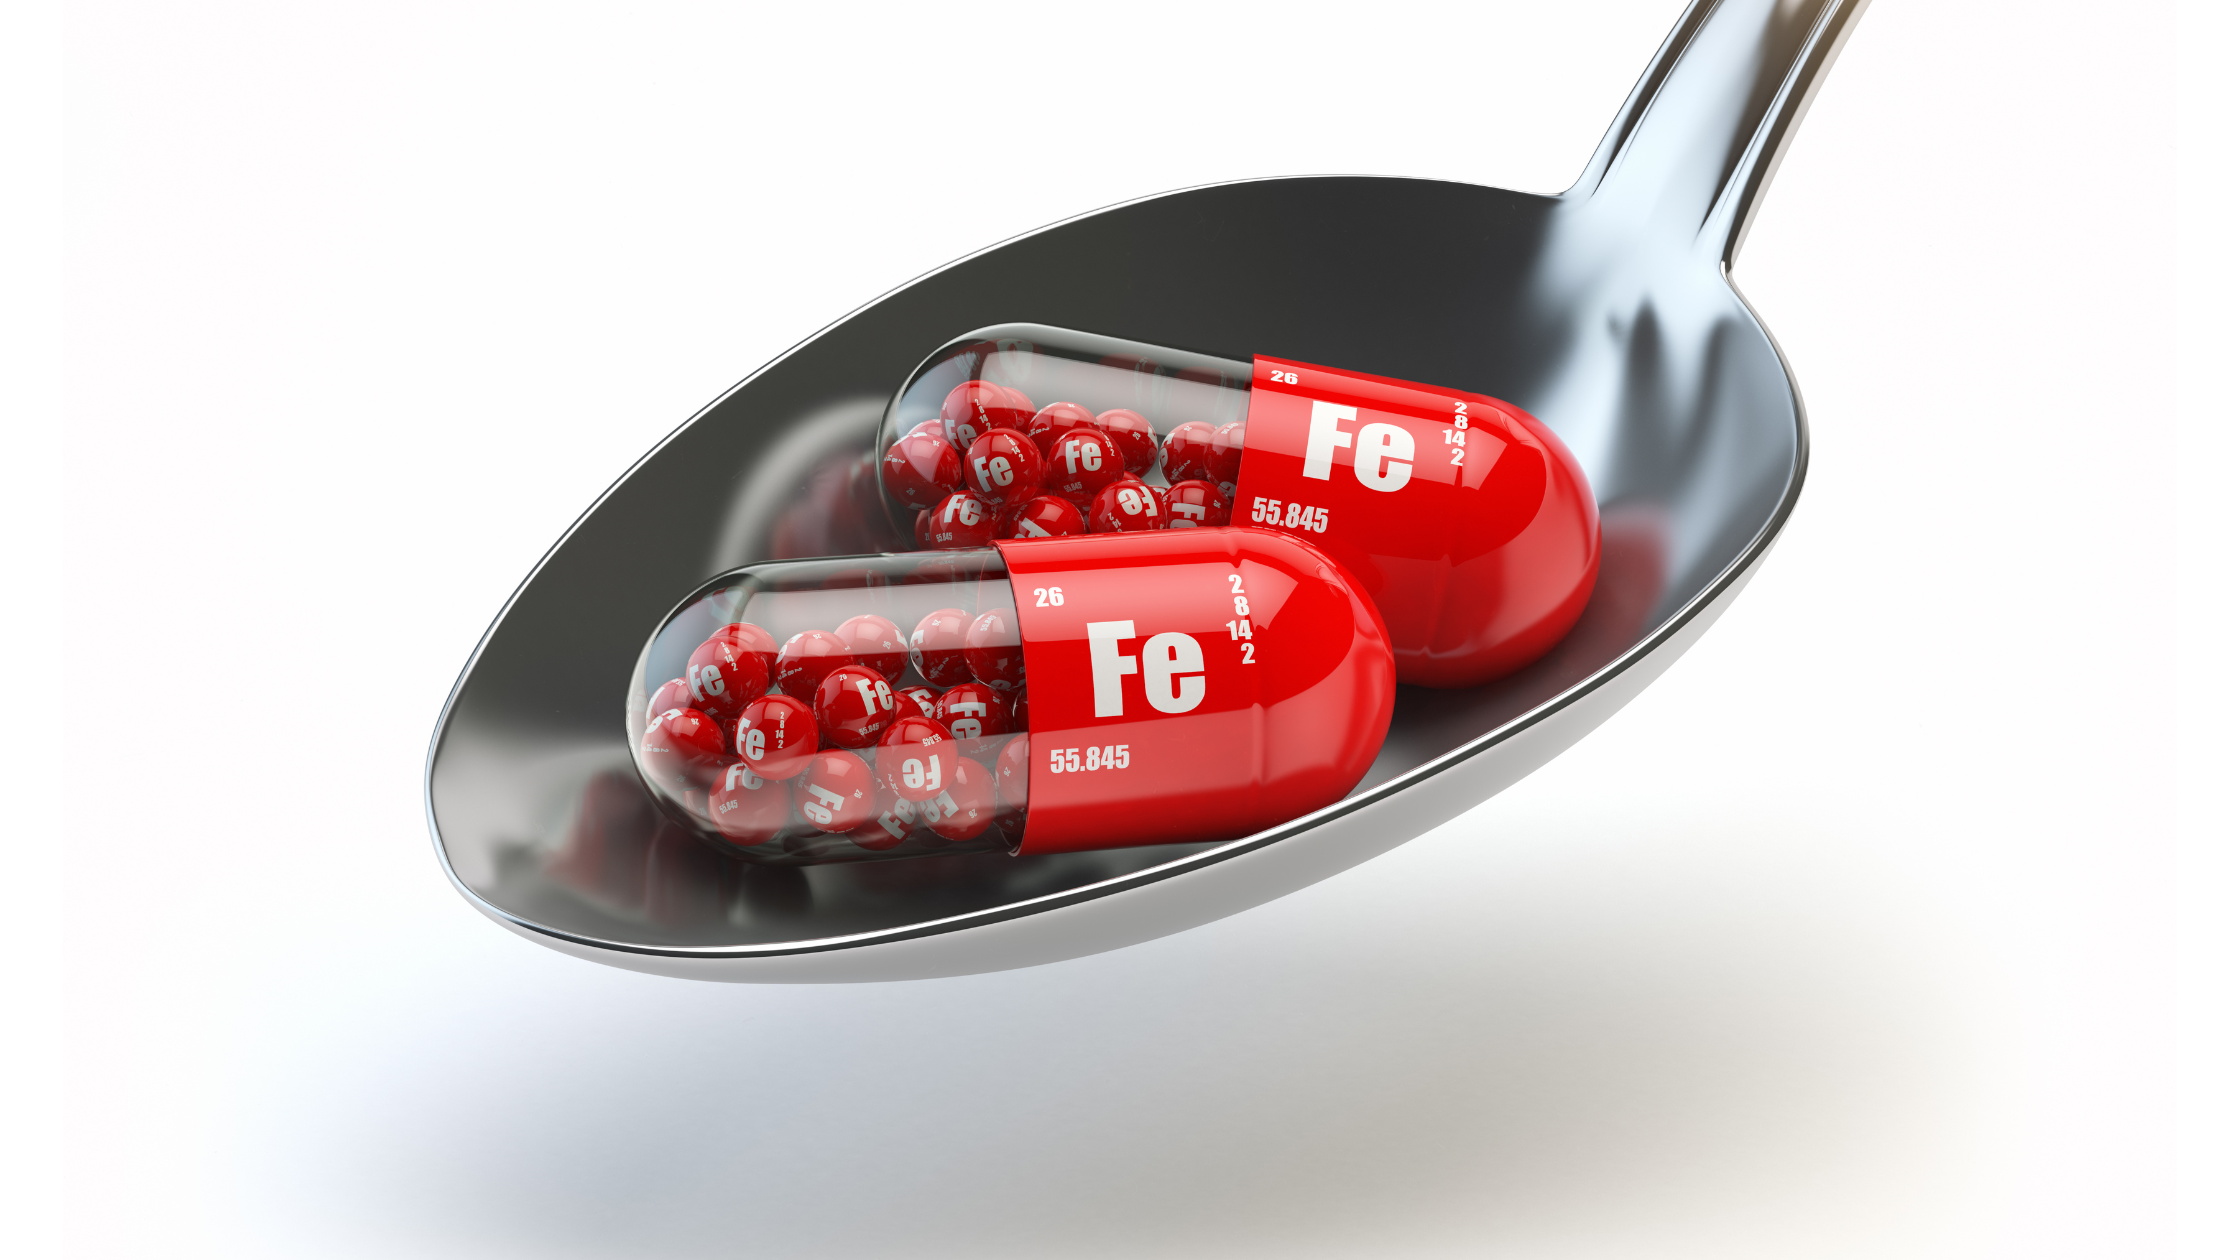 Do Iron Supplements Cause Constipation